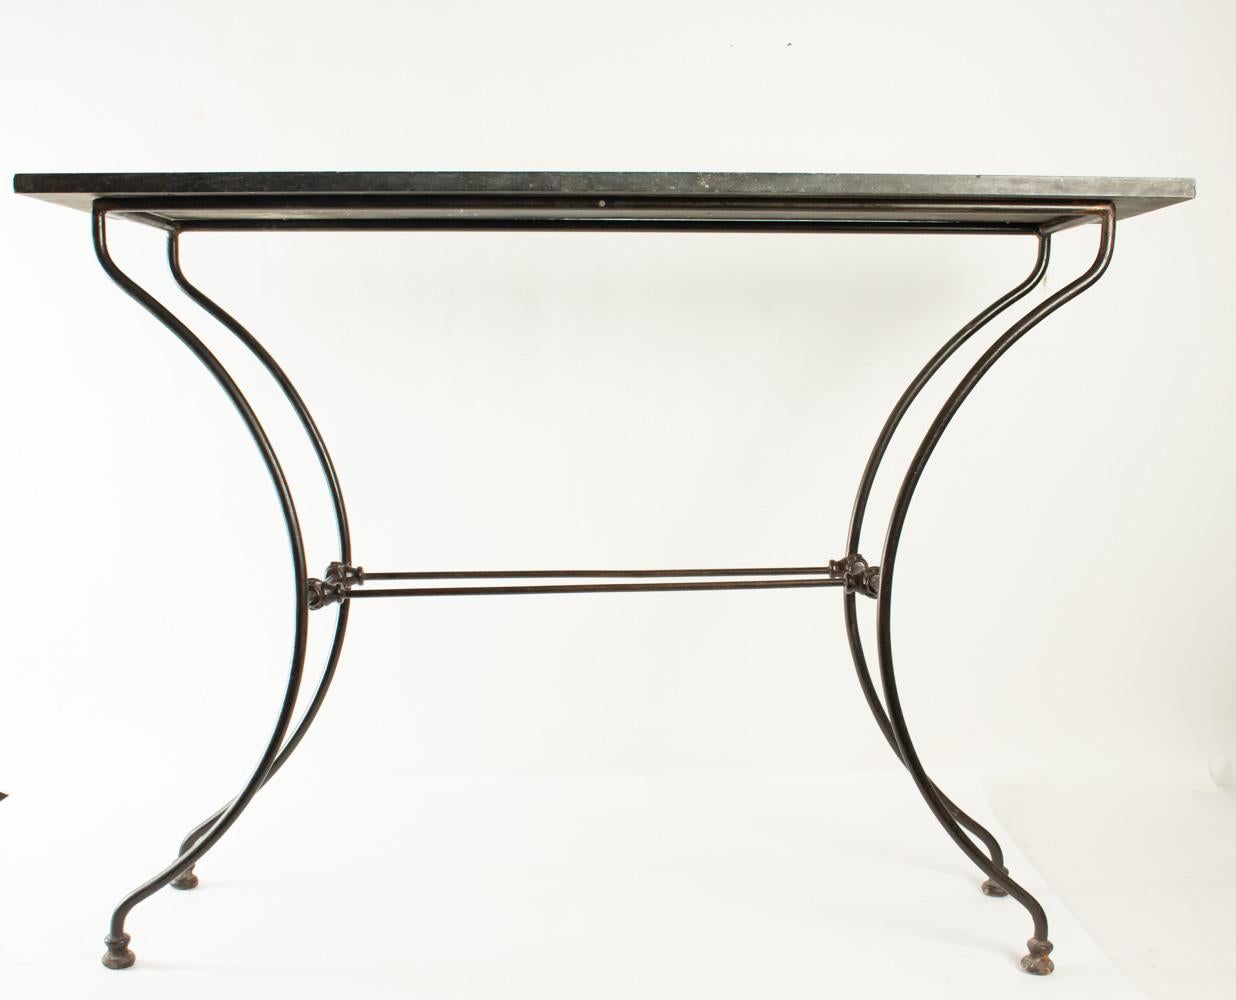 Wrought iron console with marble top, 19th century. Period Napoleon III
Measures: L 130 cm, H 92 cm, P 33 cm.
   